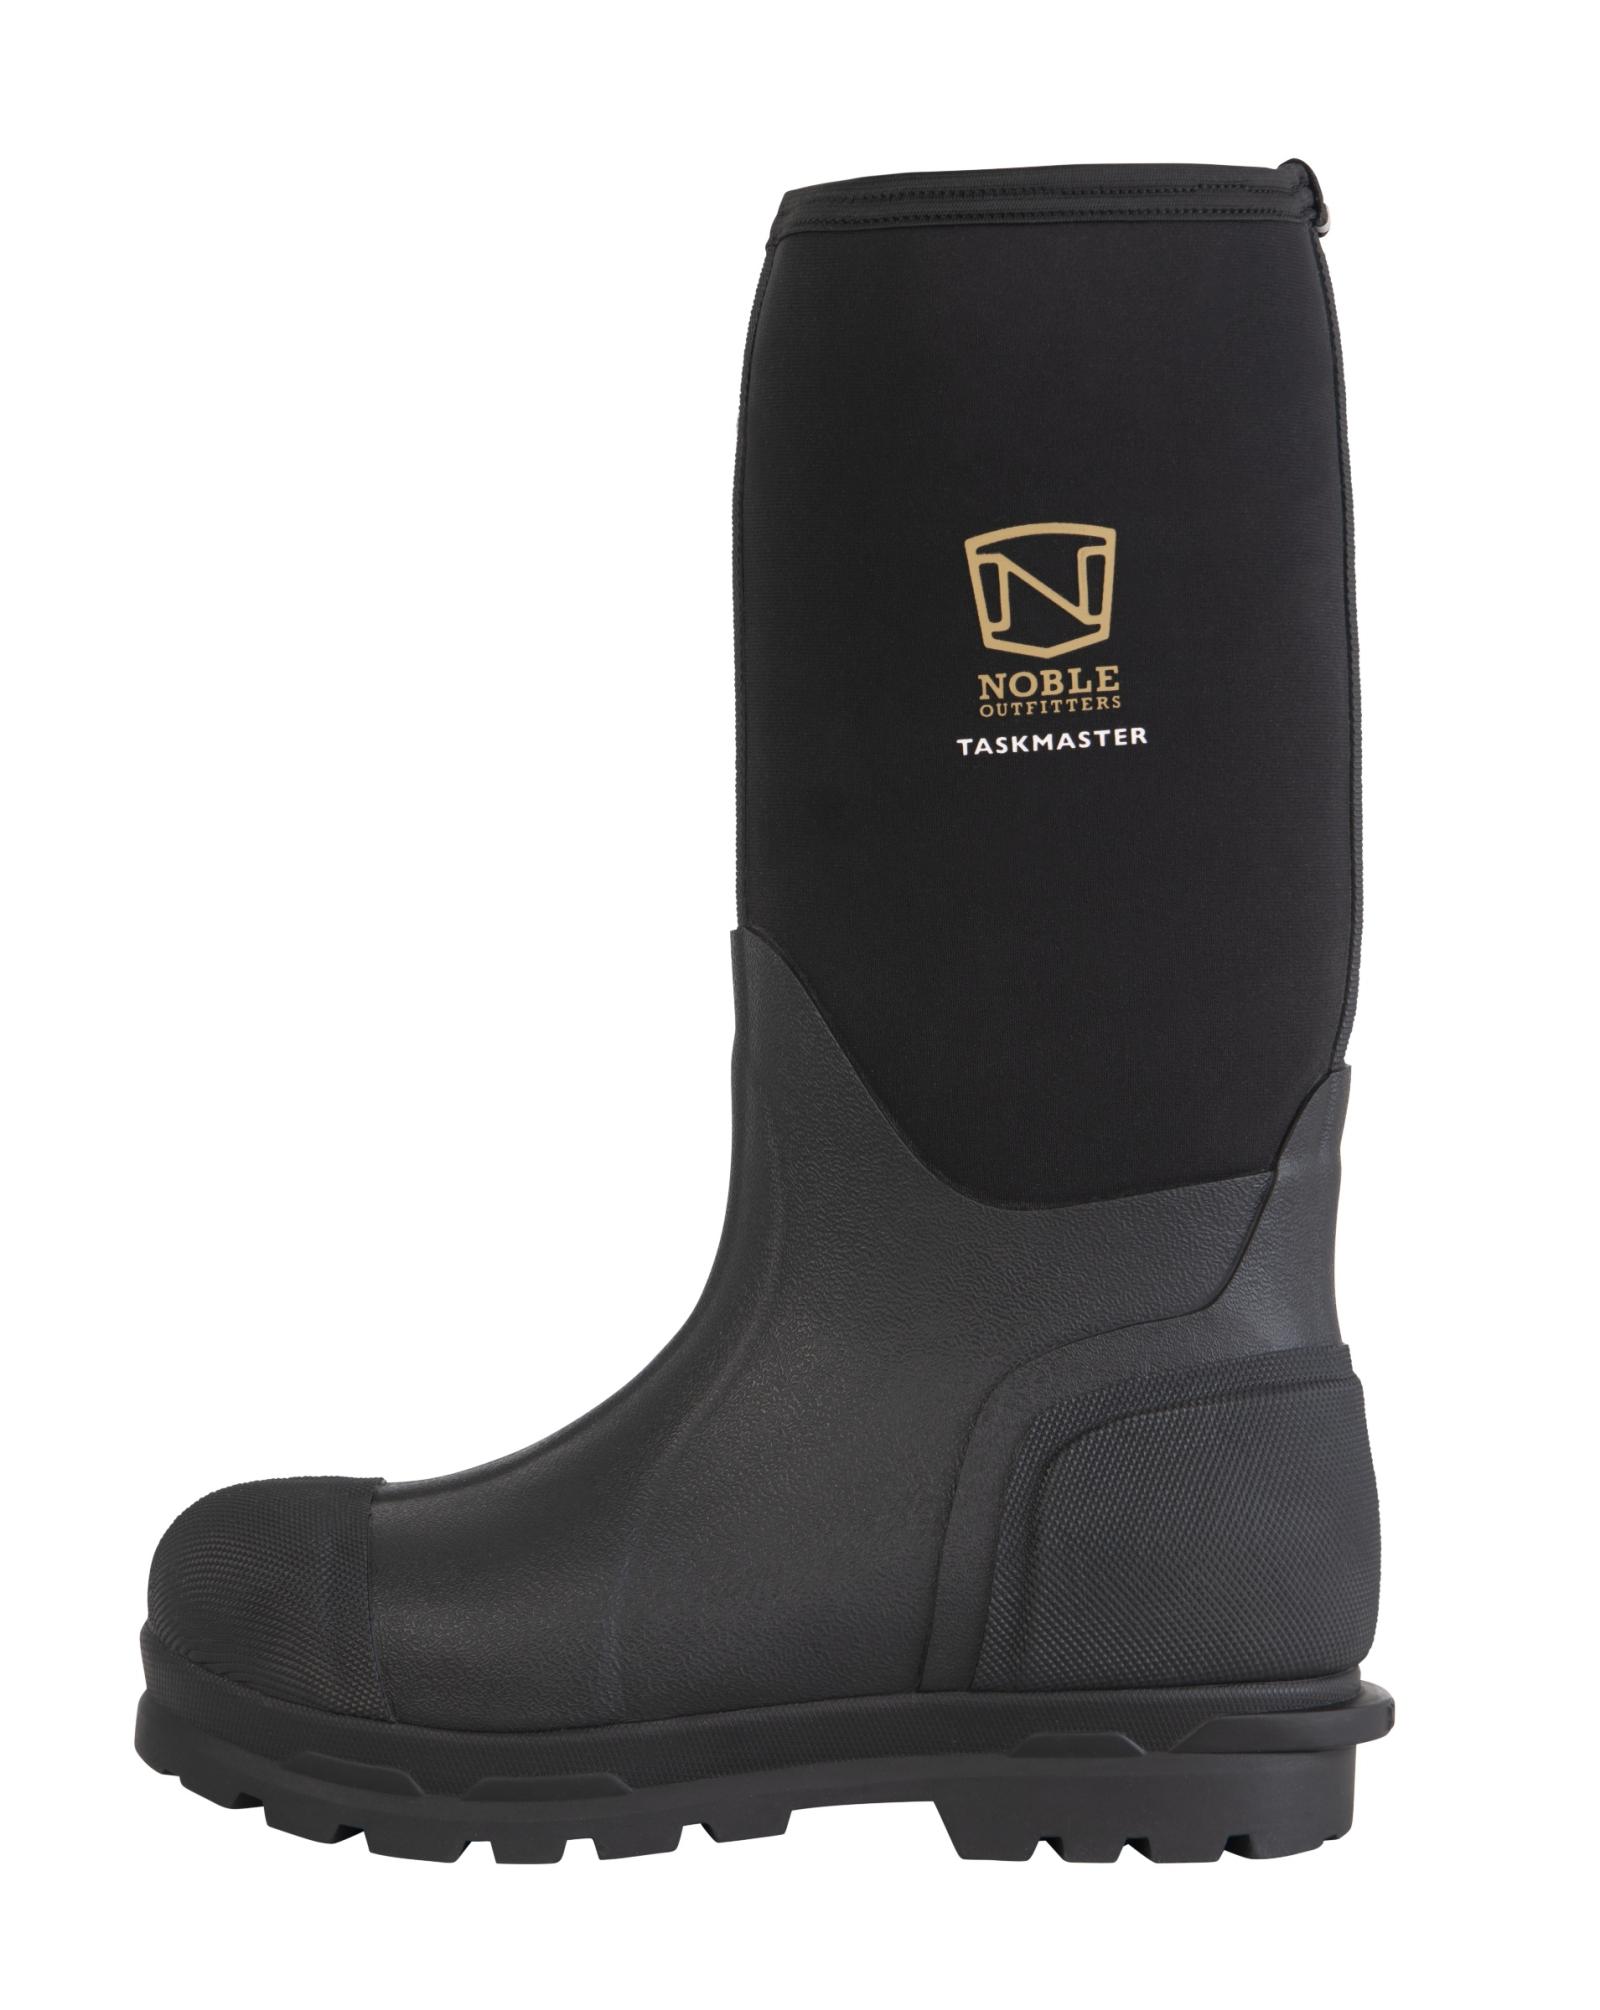 Noble Outfitters Men's MUDS Taskmaster High Boot